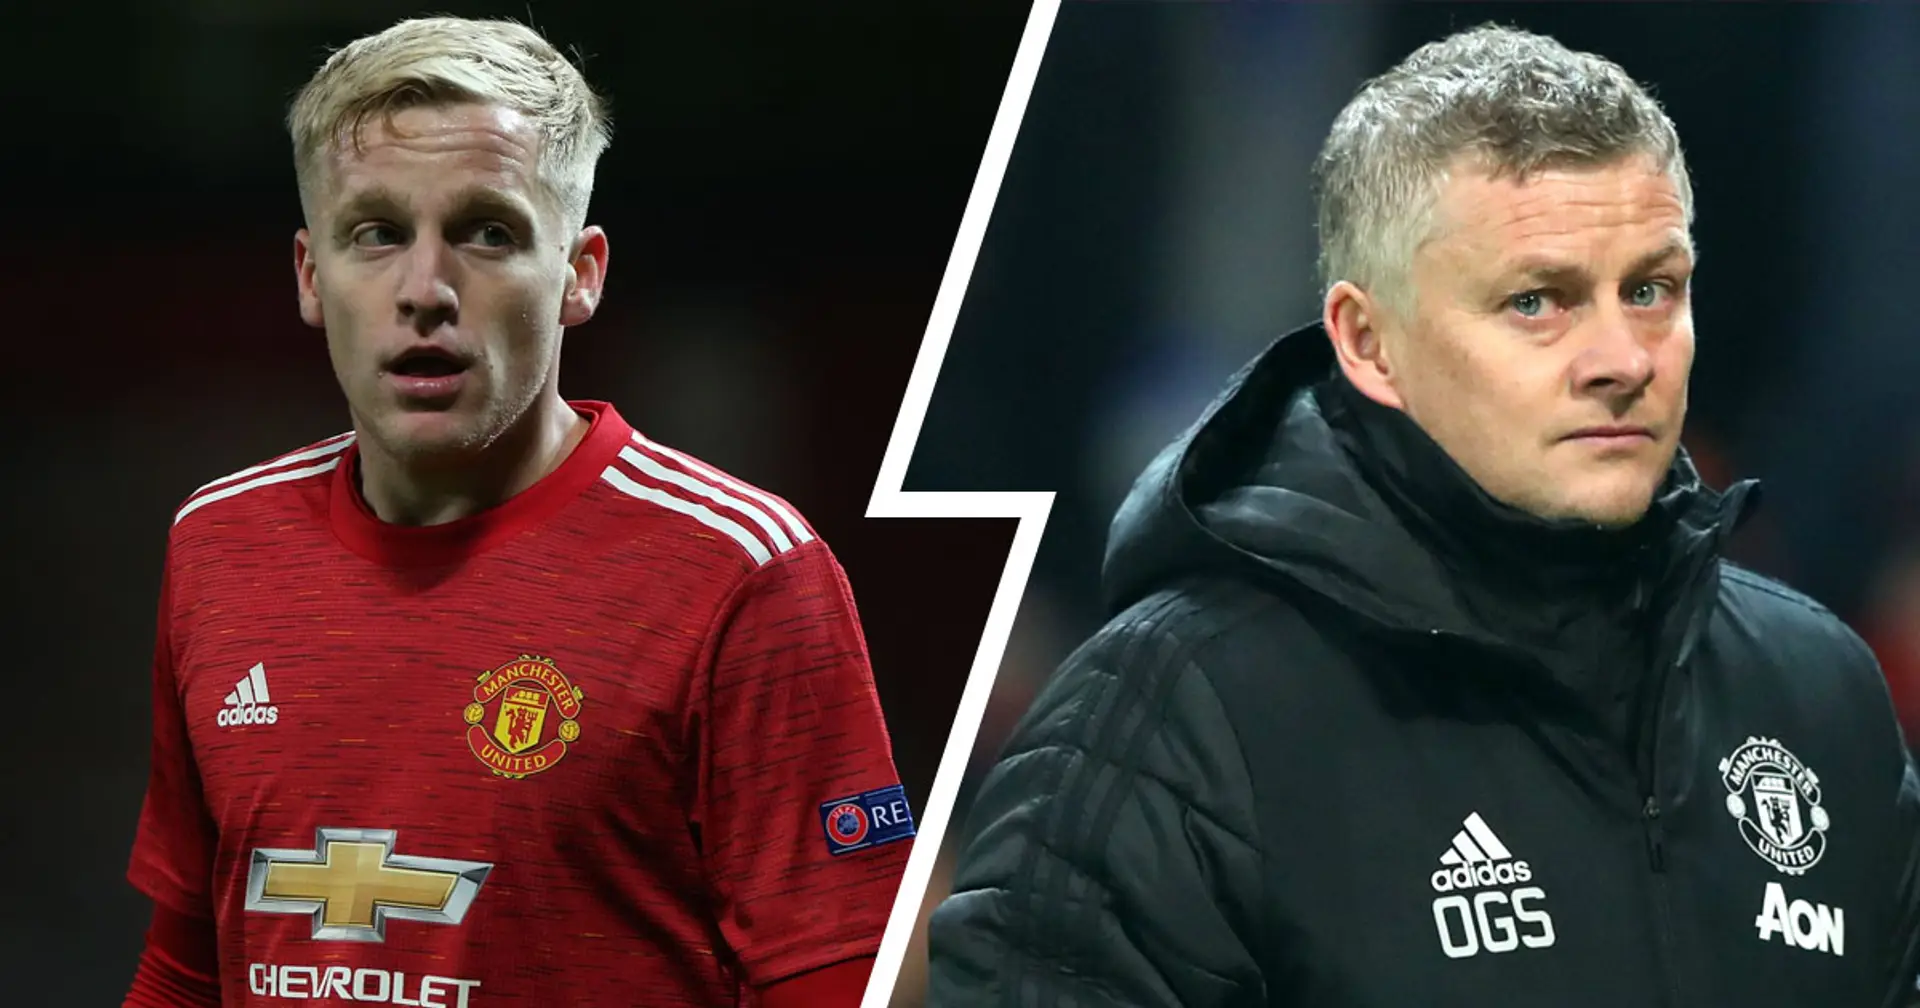 The Telegraph: Van de Beek to hold talks with Solskjaer over squad role before start of next season